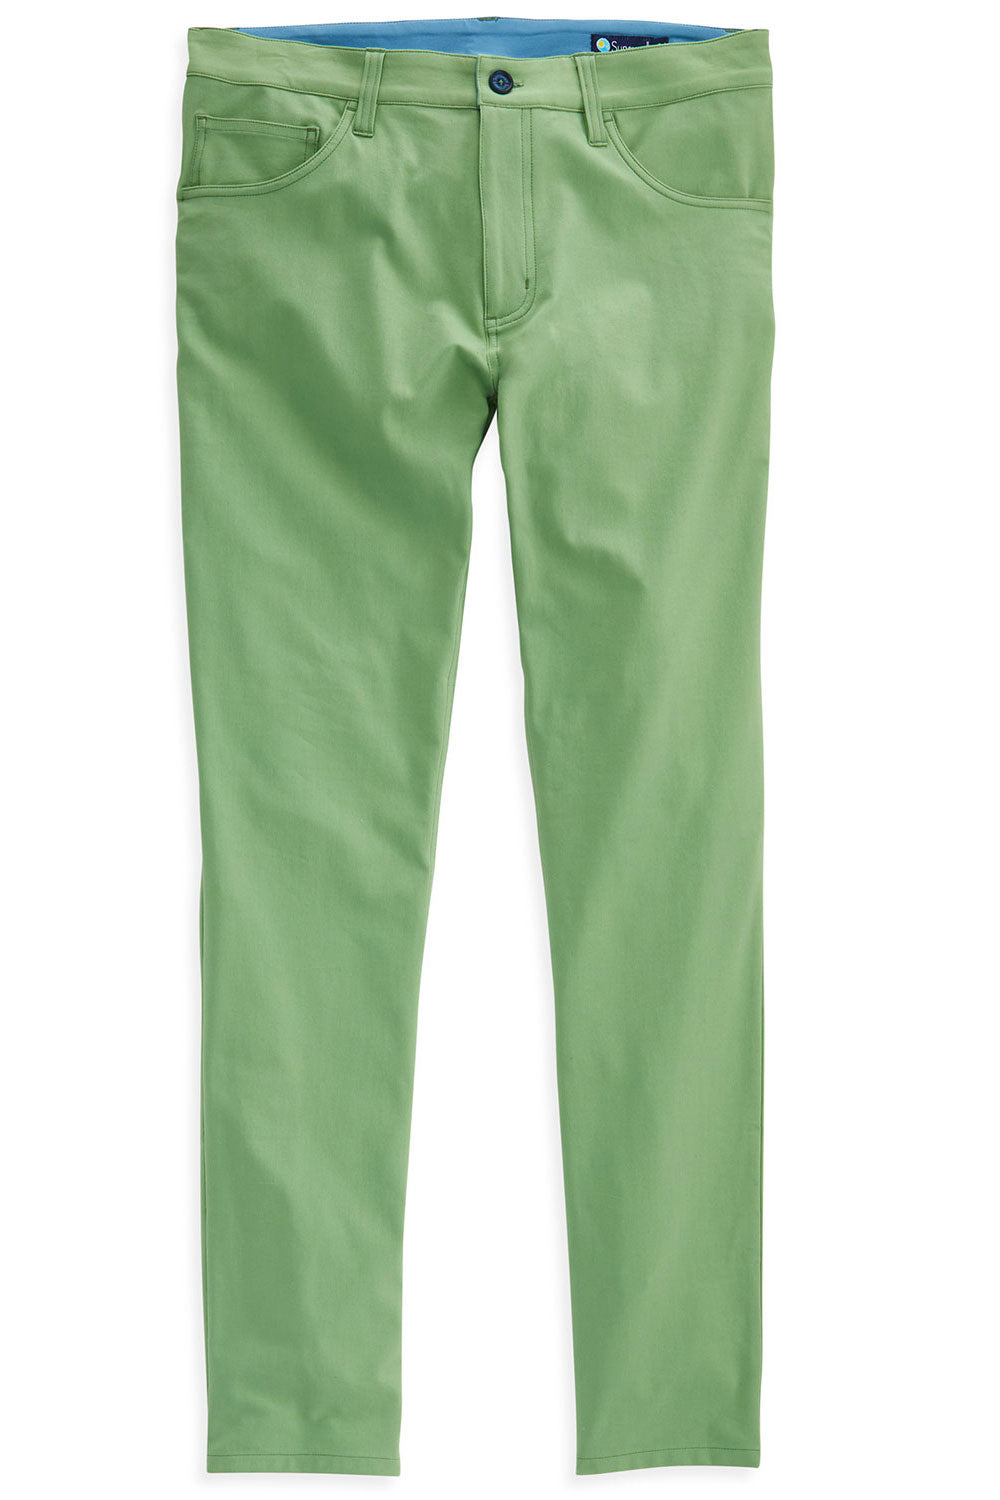 THE R&R PANT - Cactus Green